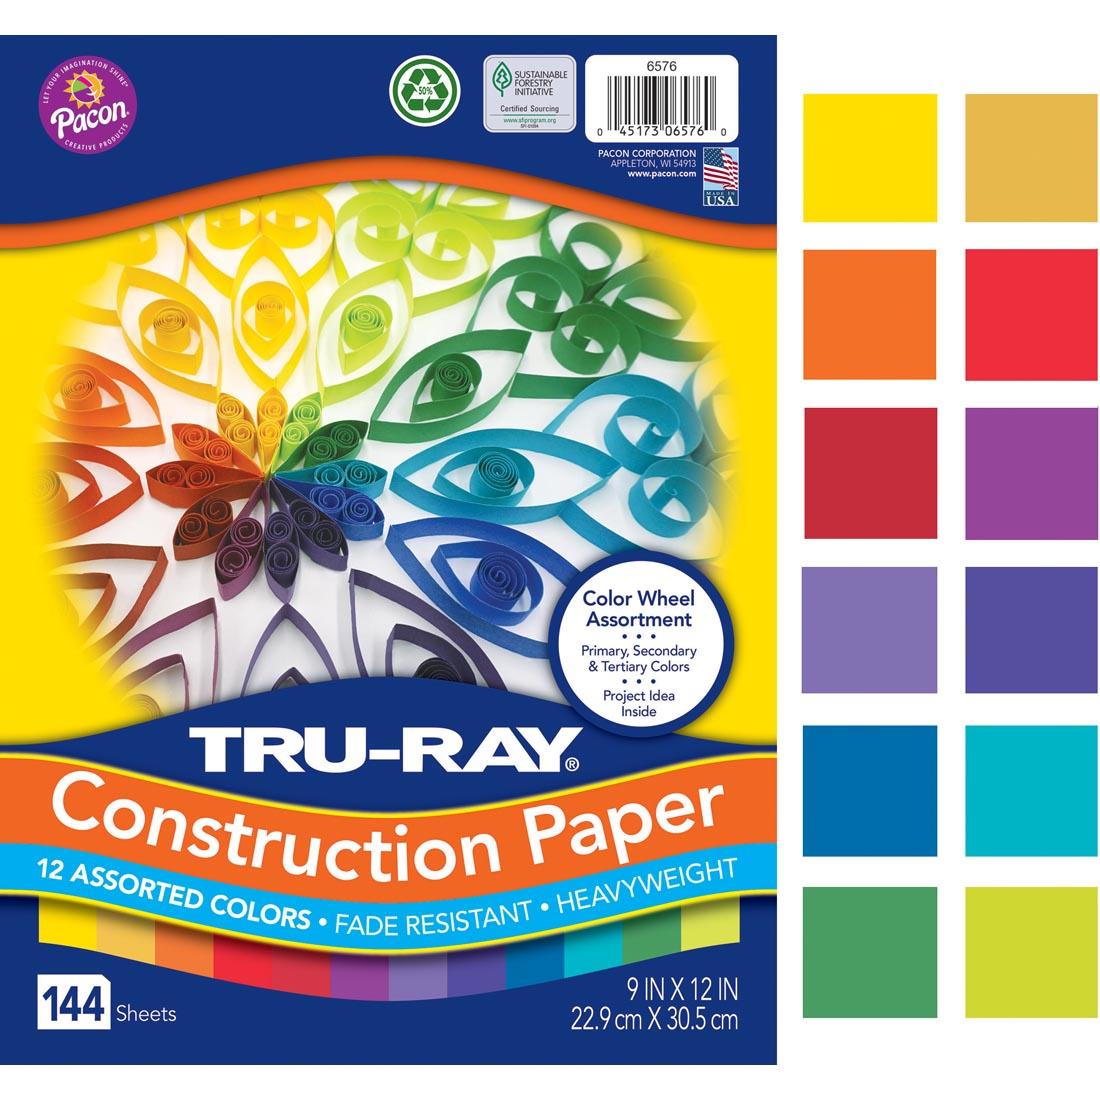 Tru-Ray Color Wheel Construction Paper Assortment package beside 12 Color Swatches